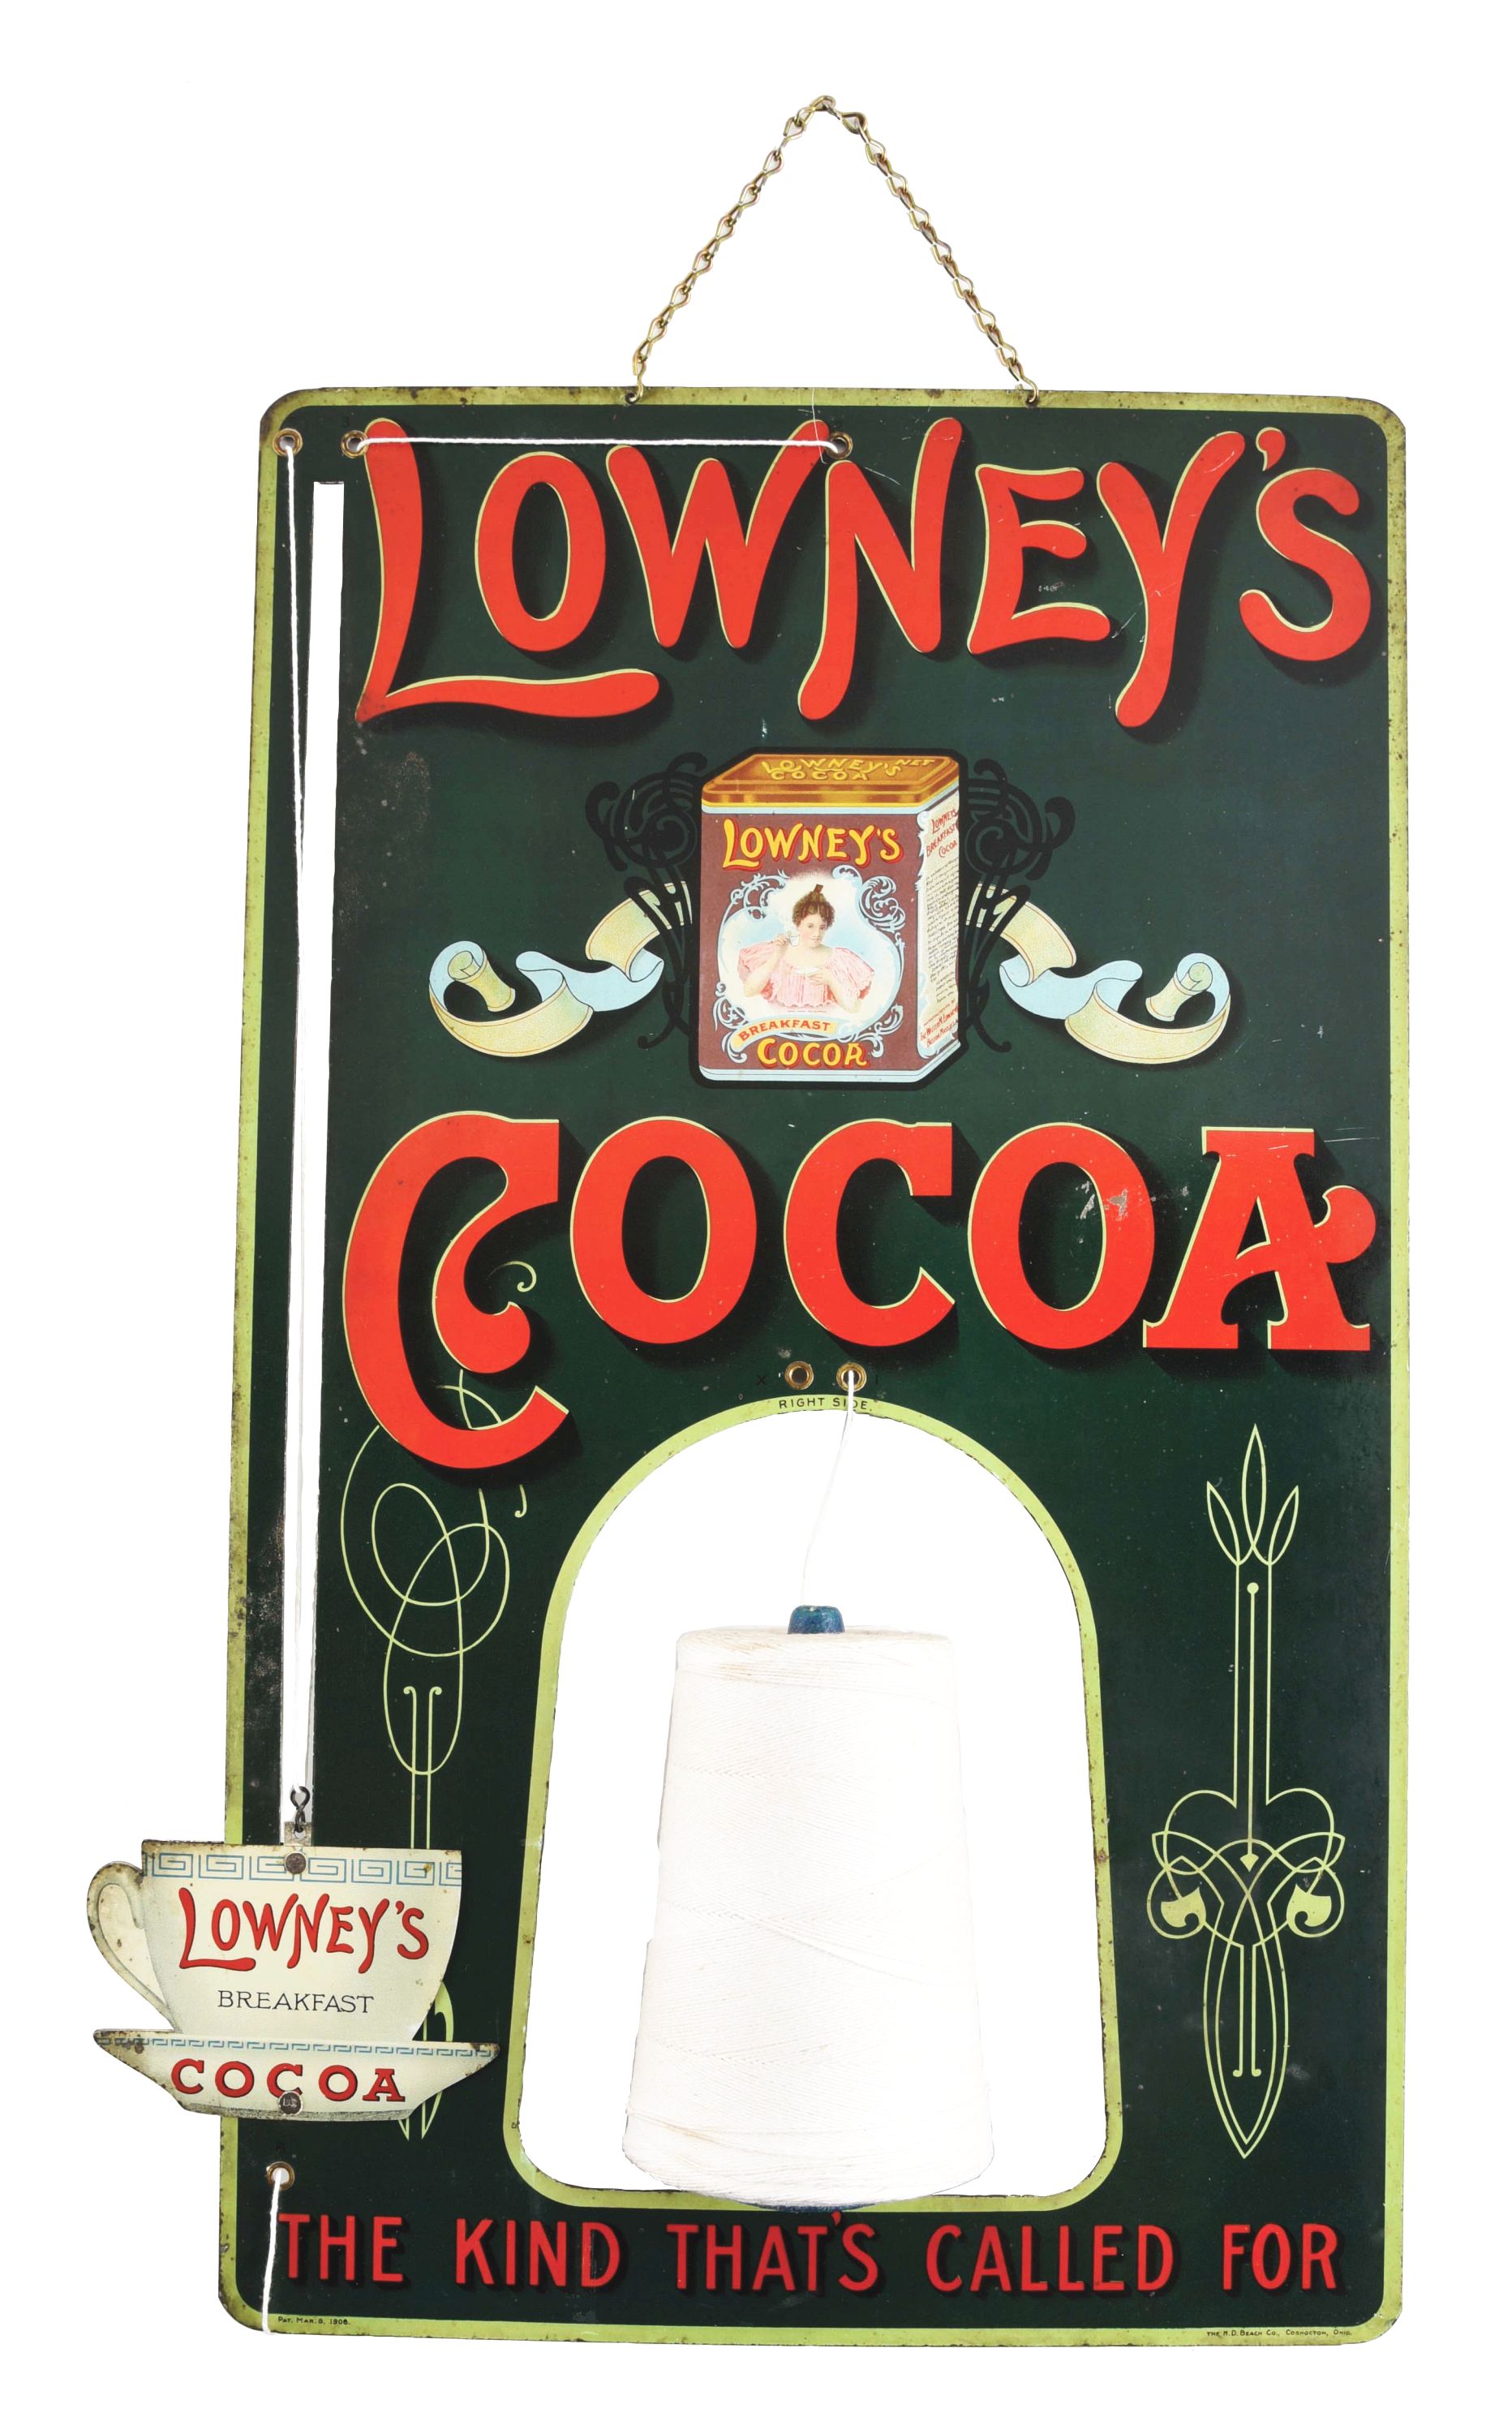 String holder advertising Lowney’s Breakfast Cocoa, patented March 8, 1908. When string is pulled, cocoa cup rises upward in vertical slot at left side of sign. Size 24 x 13¼in. Graded Good+ and very hard to find in this condition. Estimate $4,000-$7,000